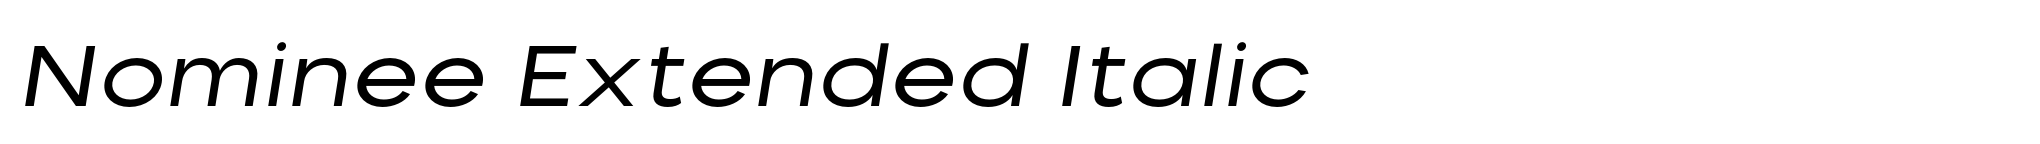 Nominee Extended Italic image